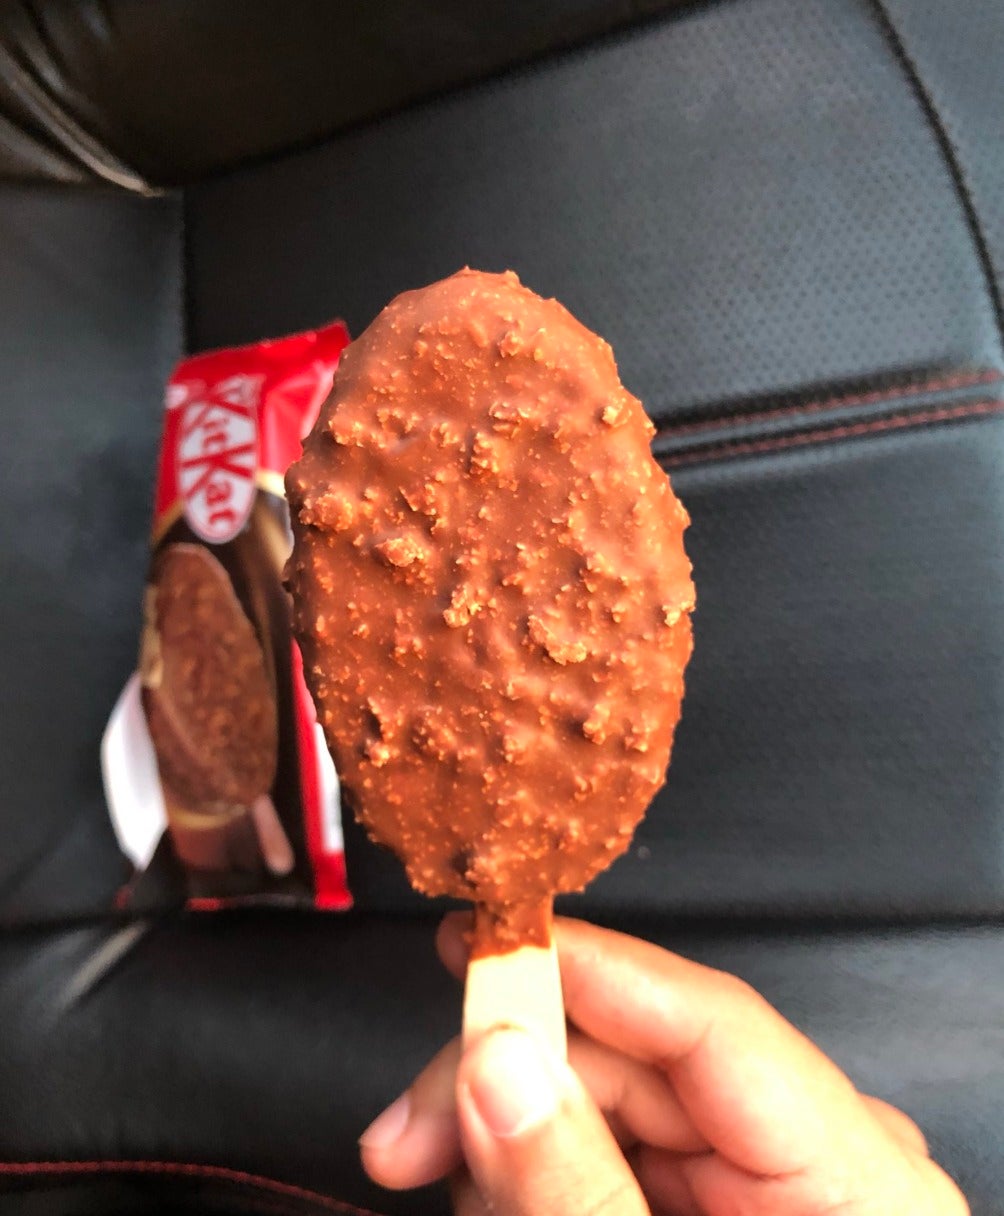 Yummy Kitkat Ice Cream Sticks Are Now Available In Malaysia &Amp; We're Drooling! - World Of Buzz 1